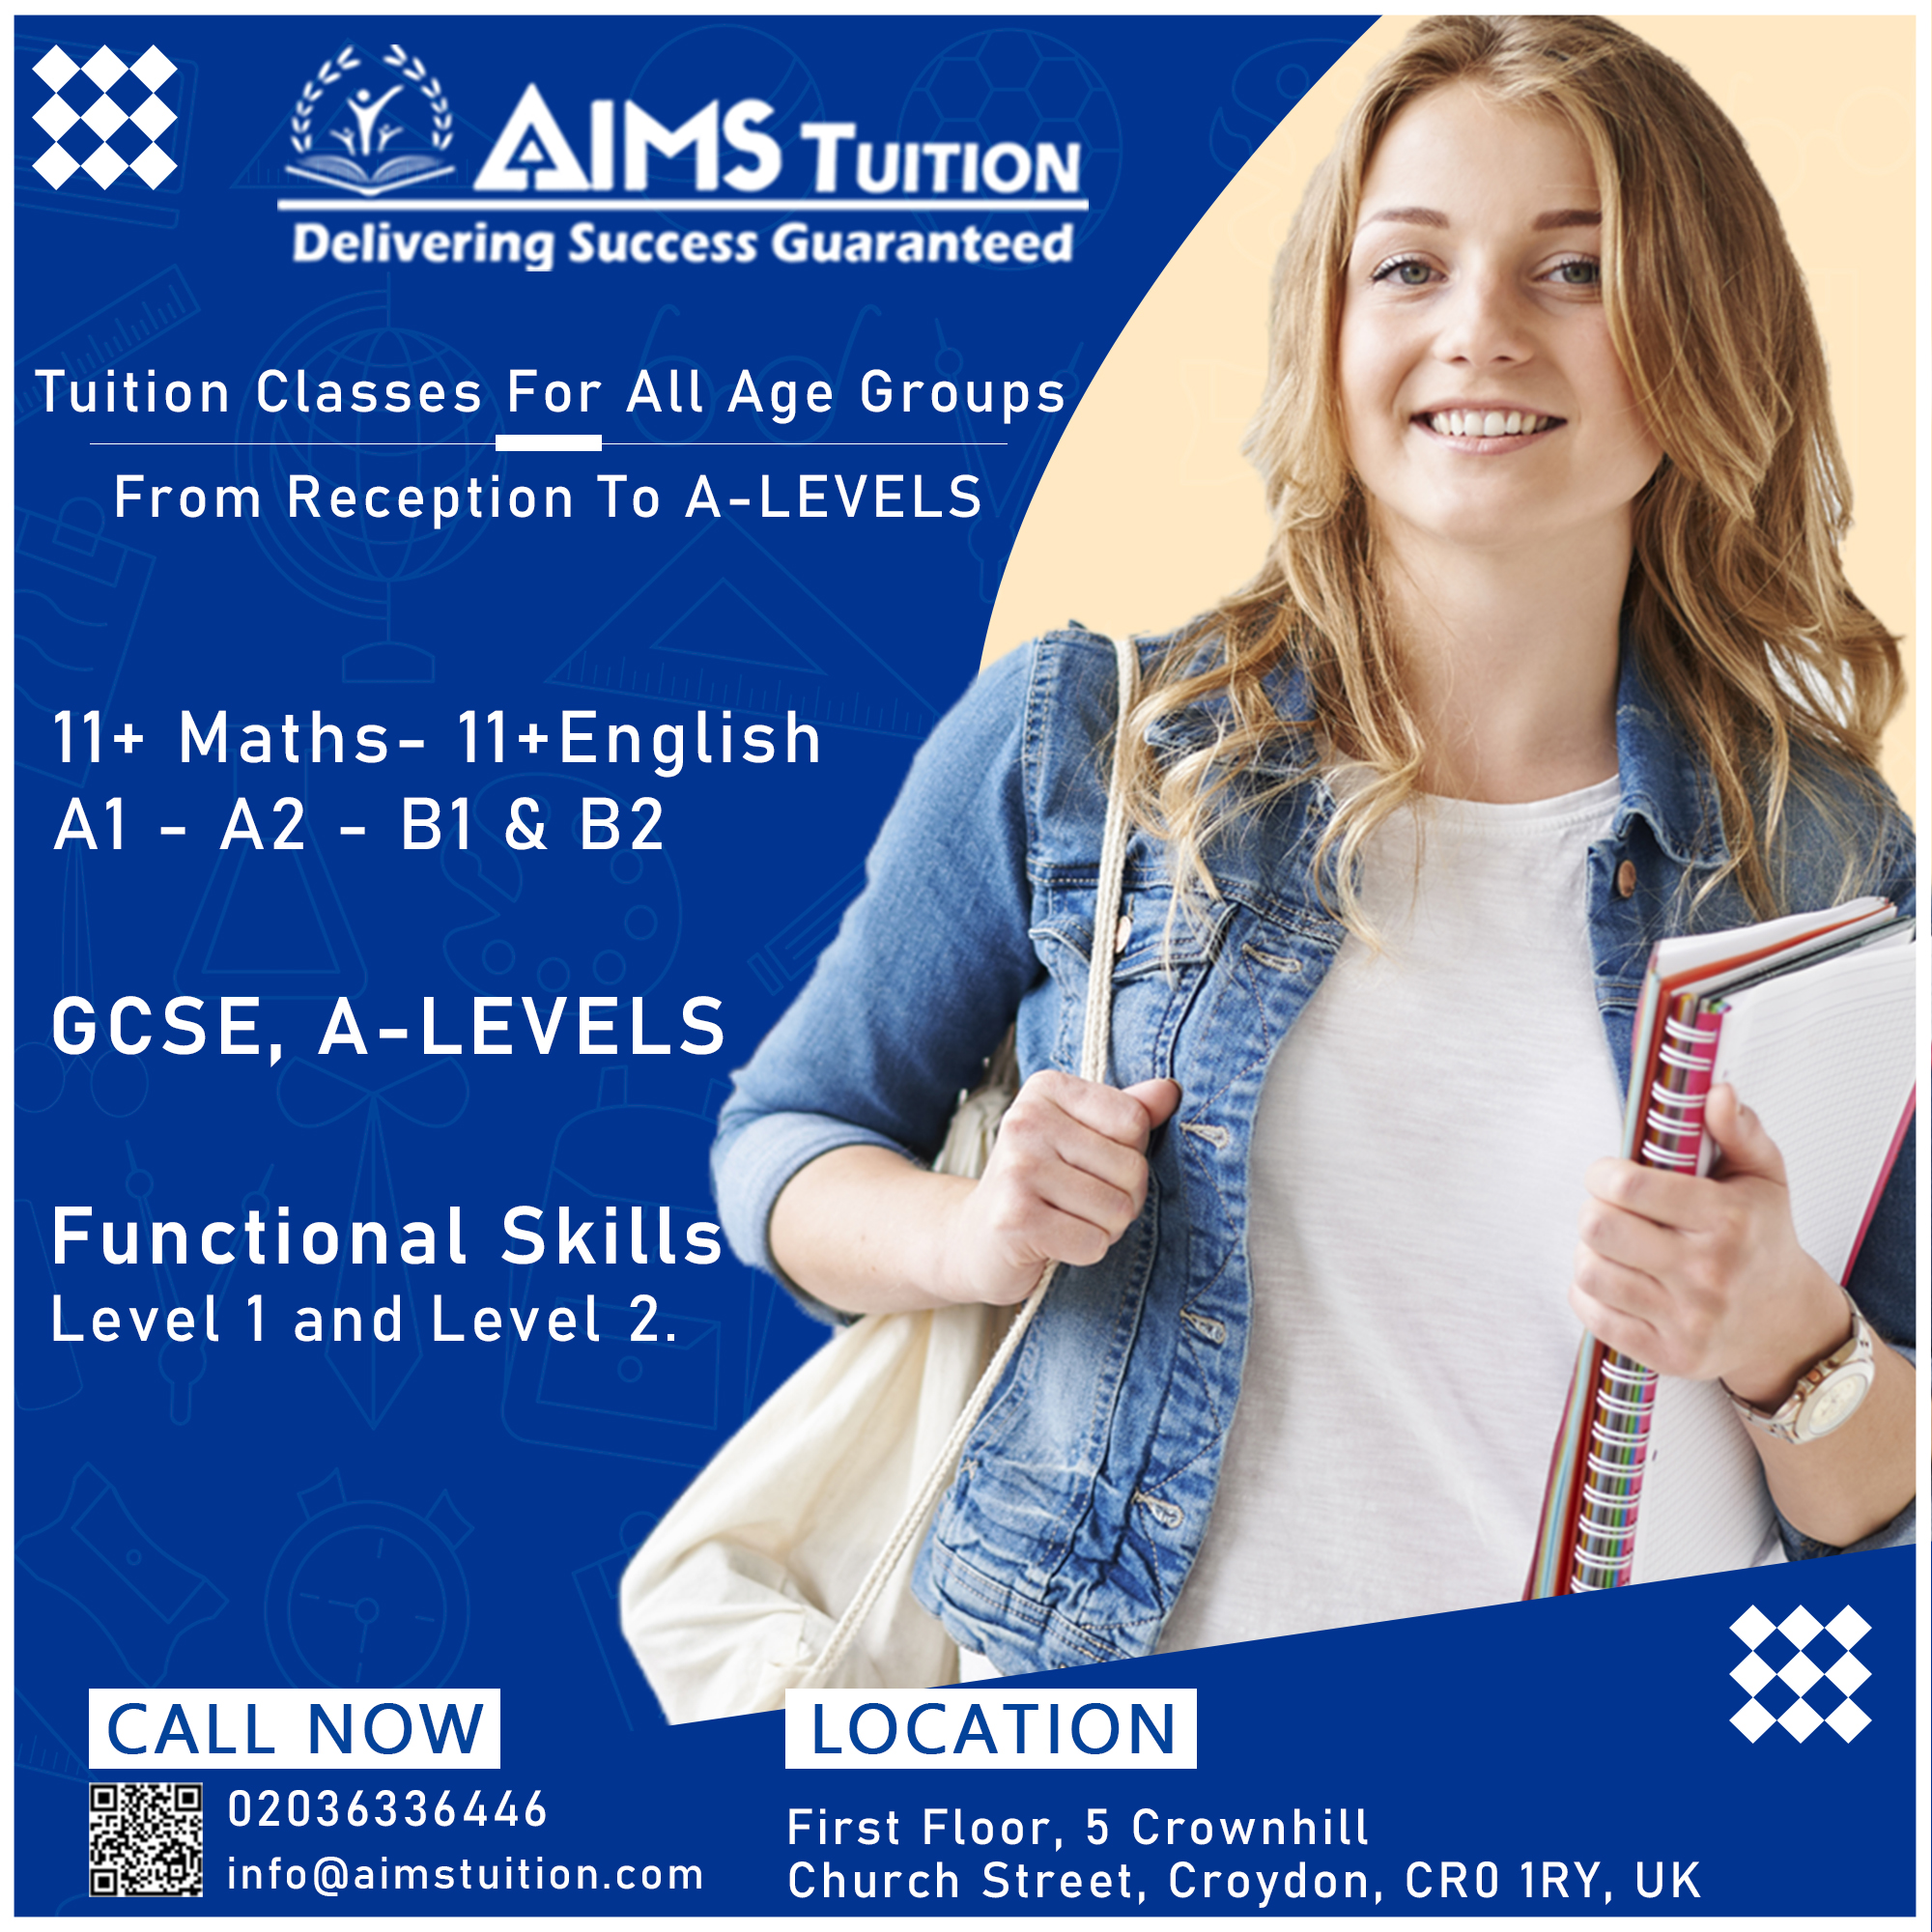 Expand Your Knowledge From reception to A-Levels